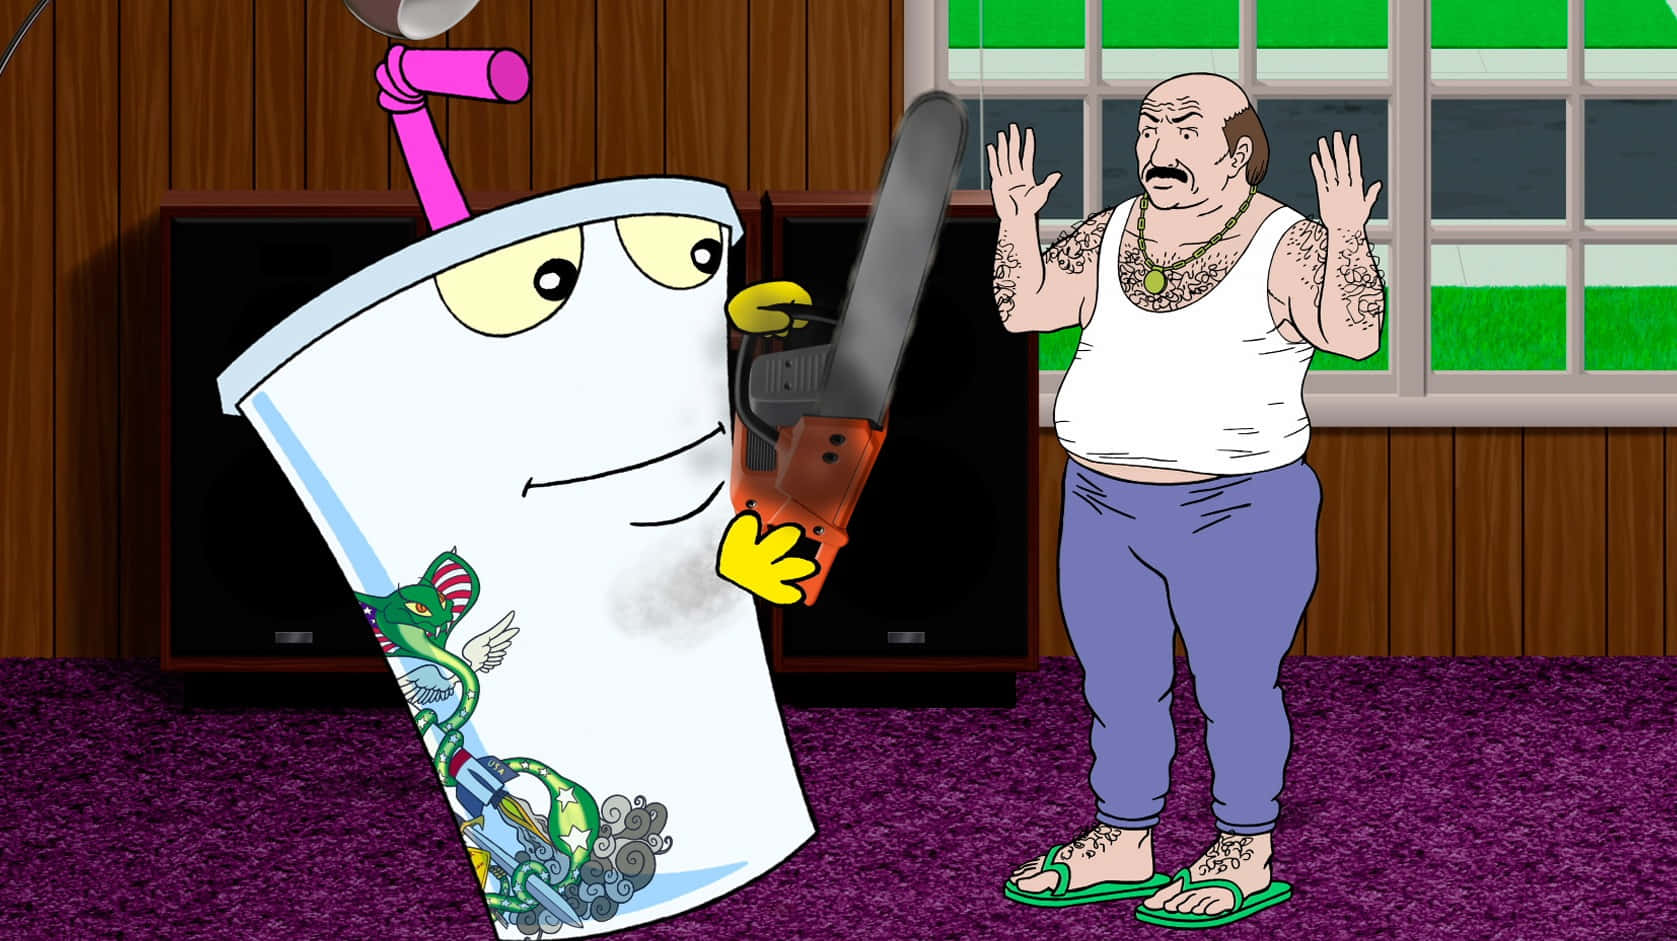 The Unstoppable Trio of Aqua Teen Hunger Force